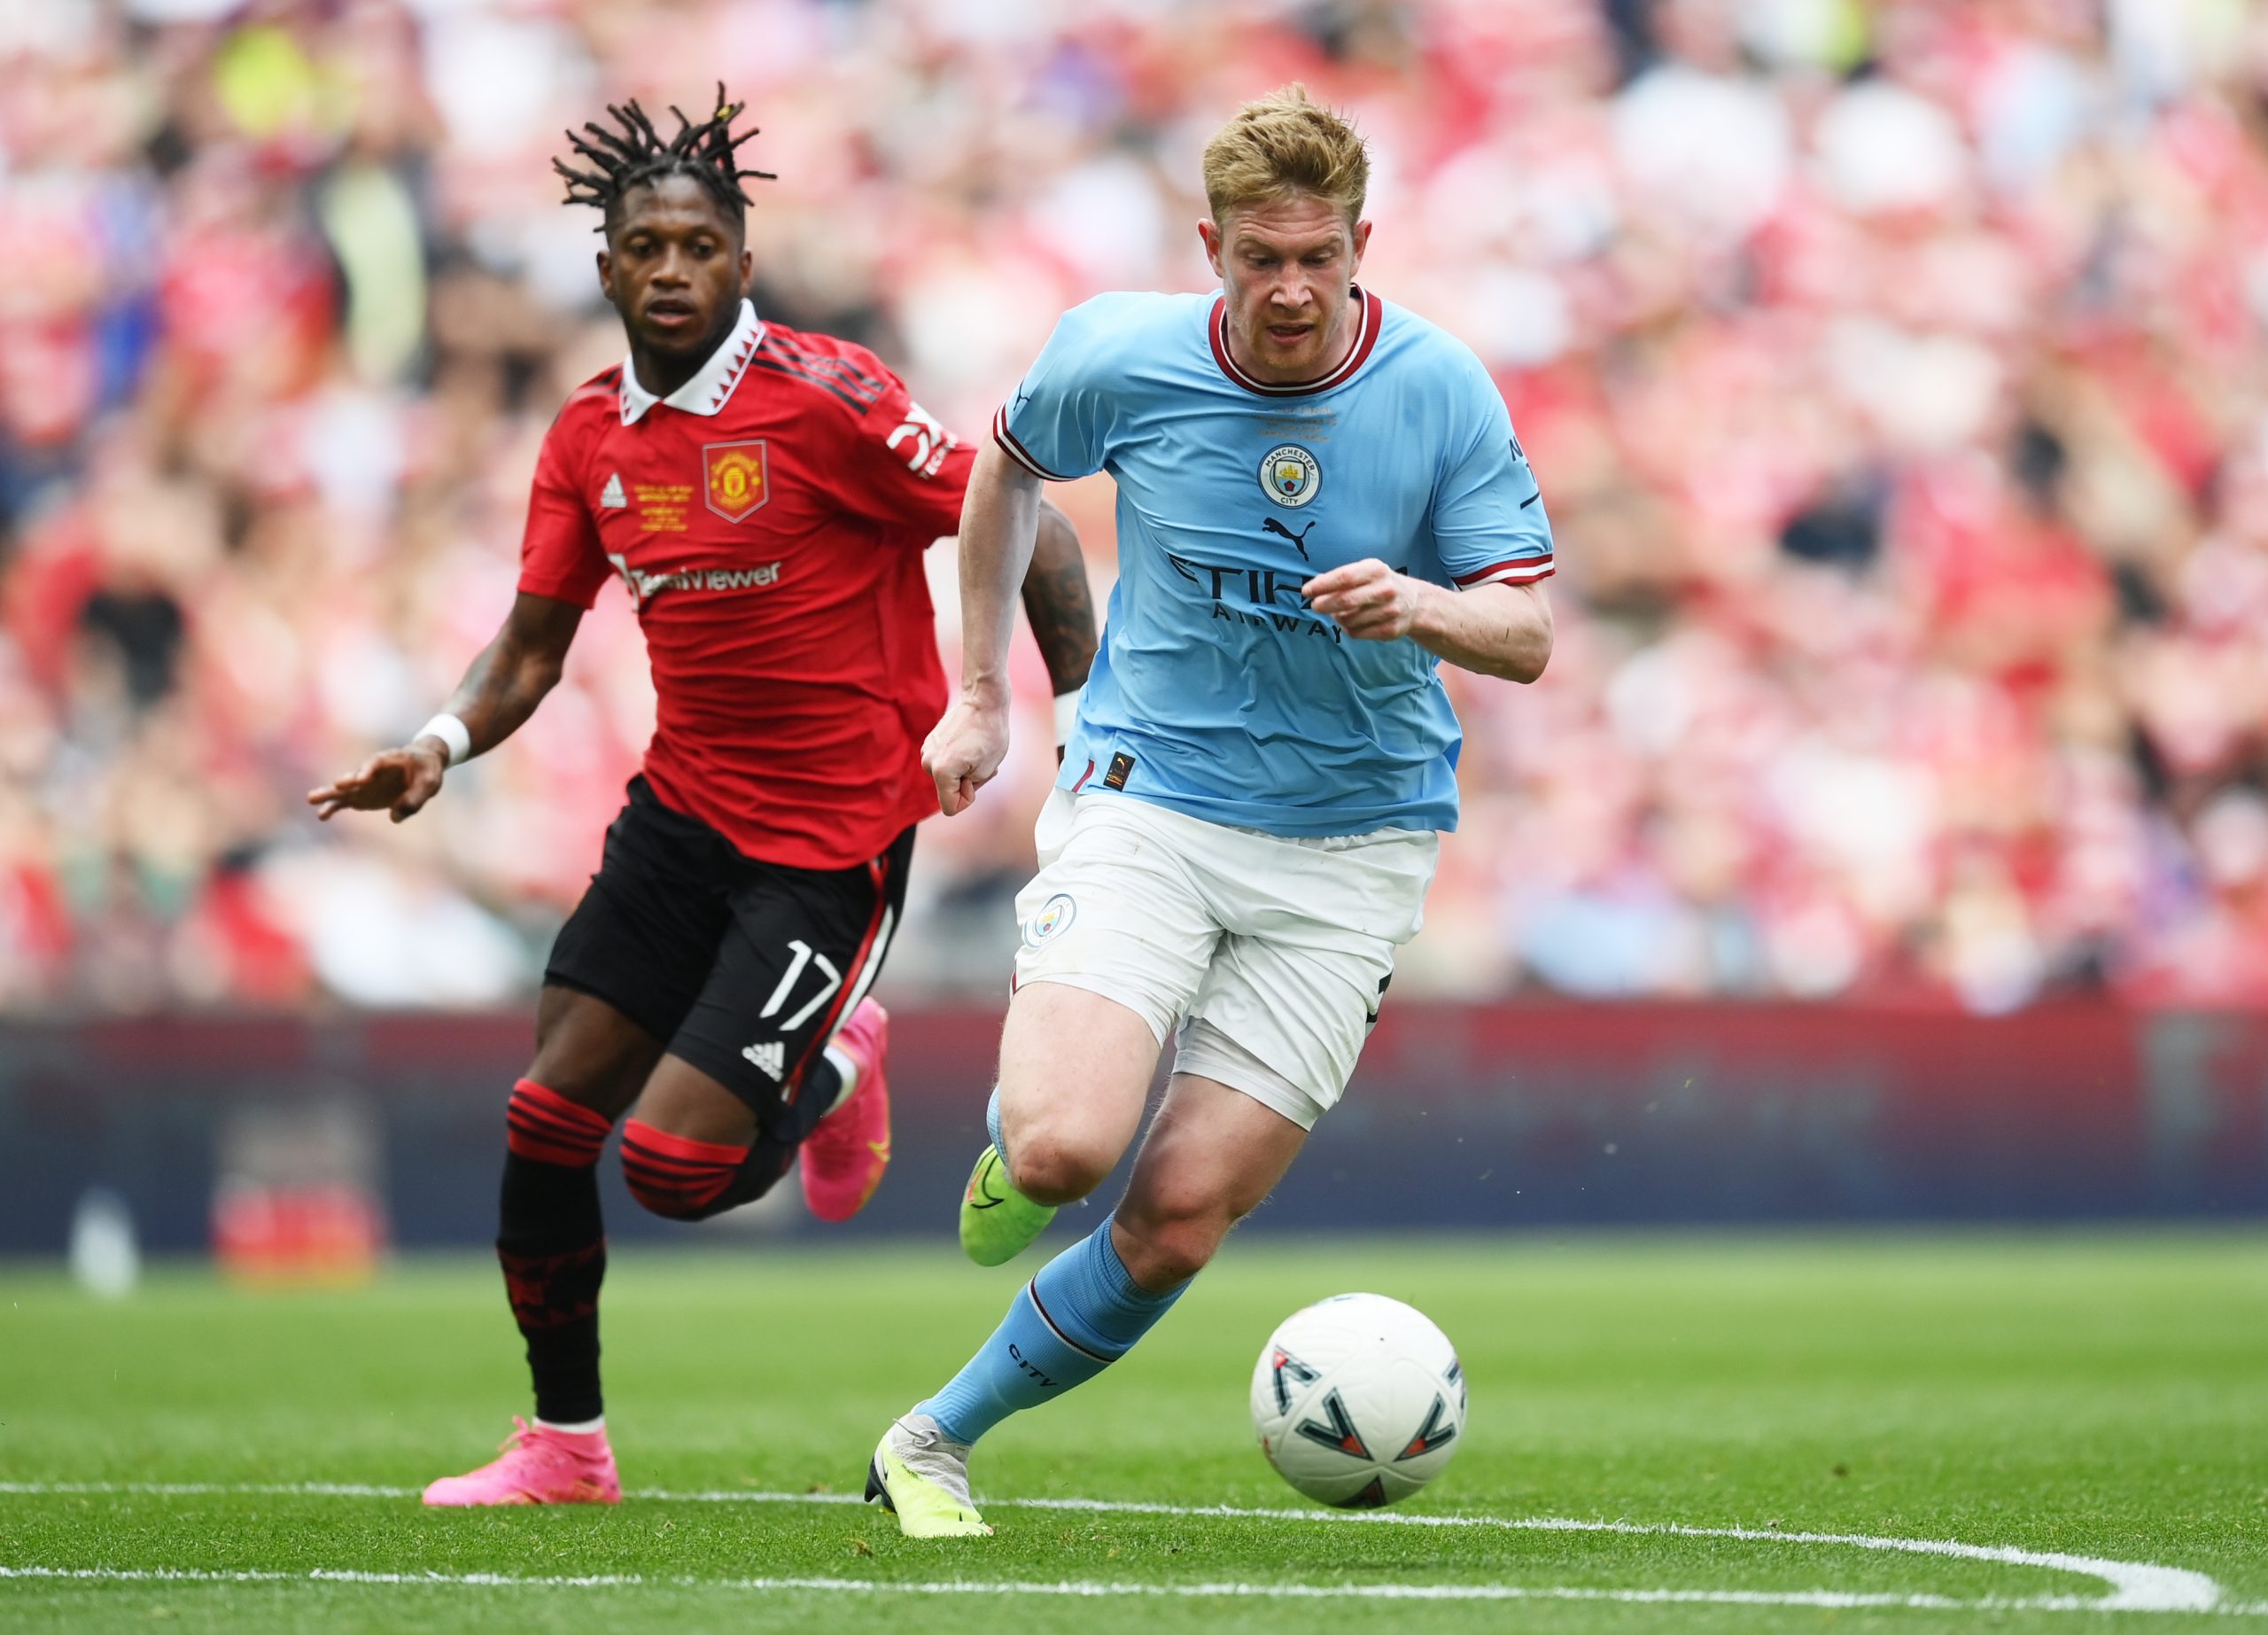 Kevin De Bruyne of Manchester City runs with the ball whilst under pressure from Fred of Manchester United during the Emirates FA Cup Final.